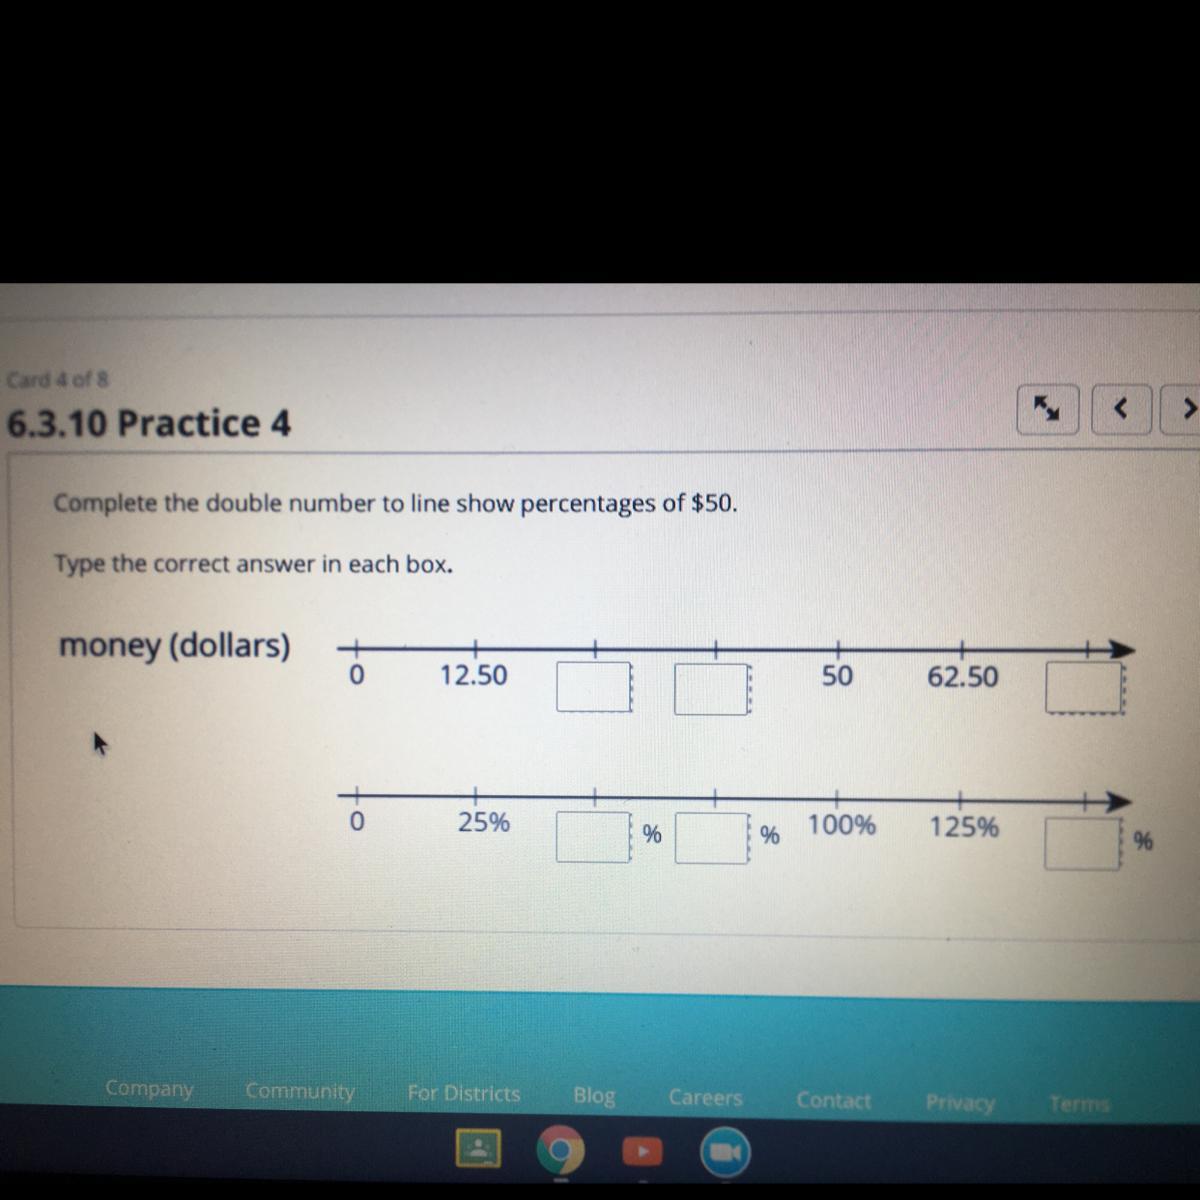 Complete The Double Number To Line Show Percentages Of $50?